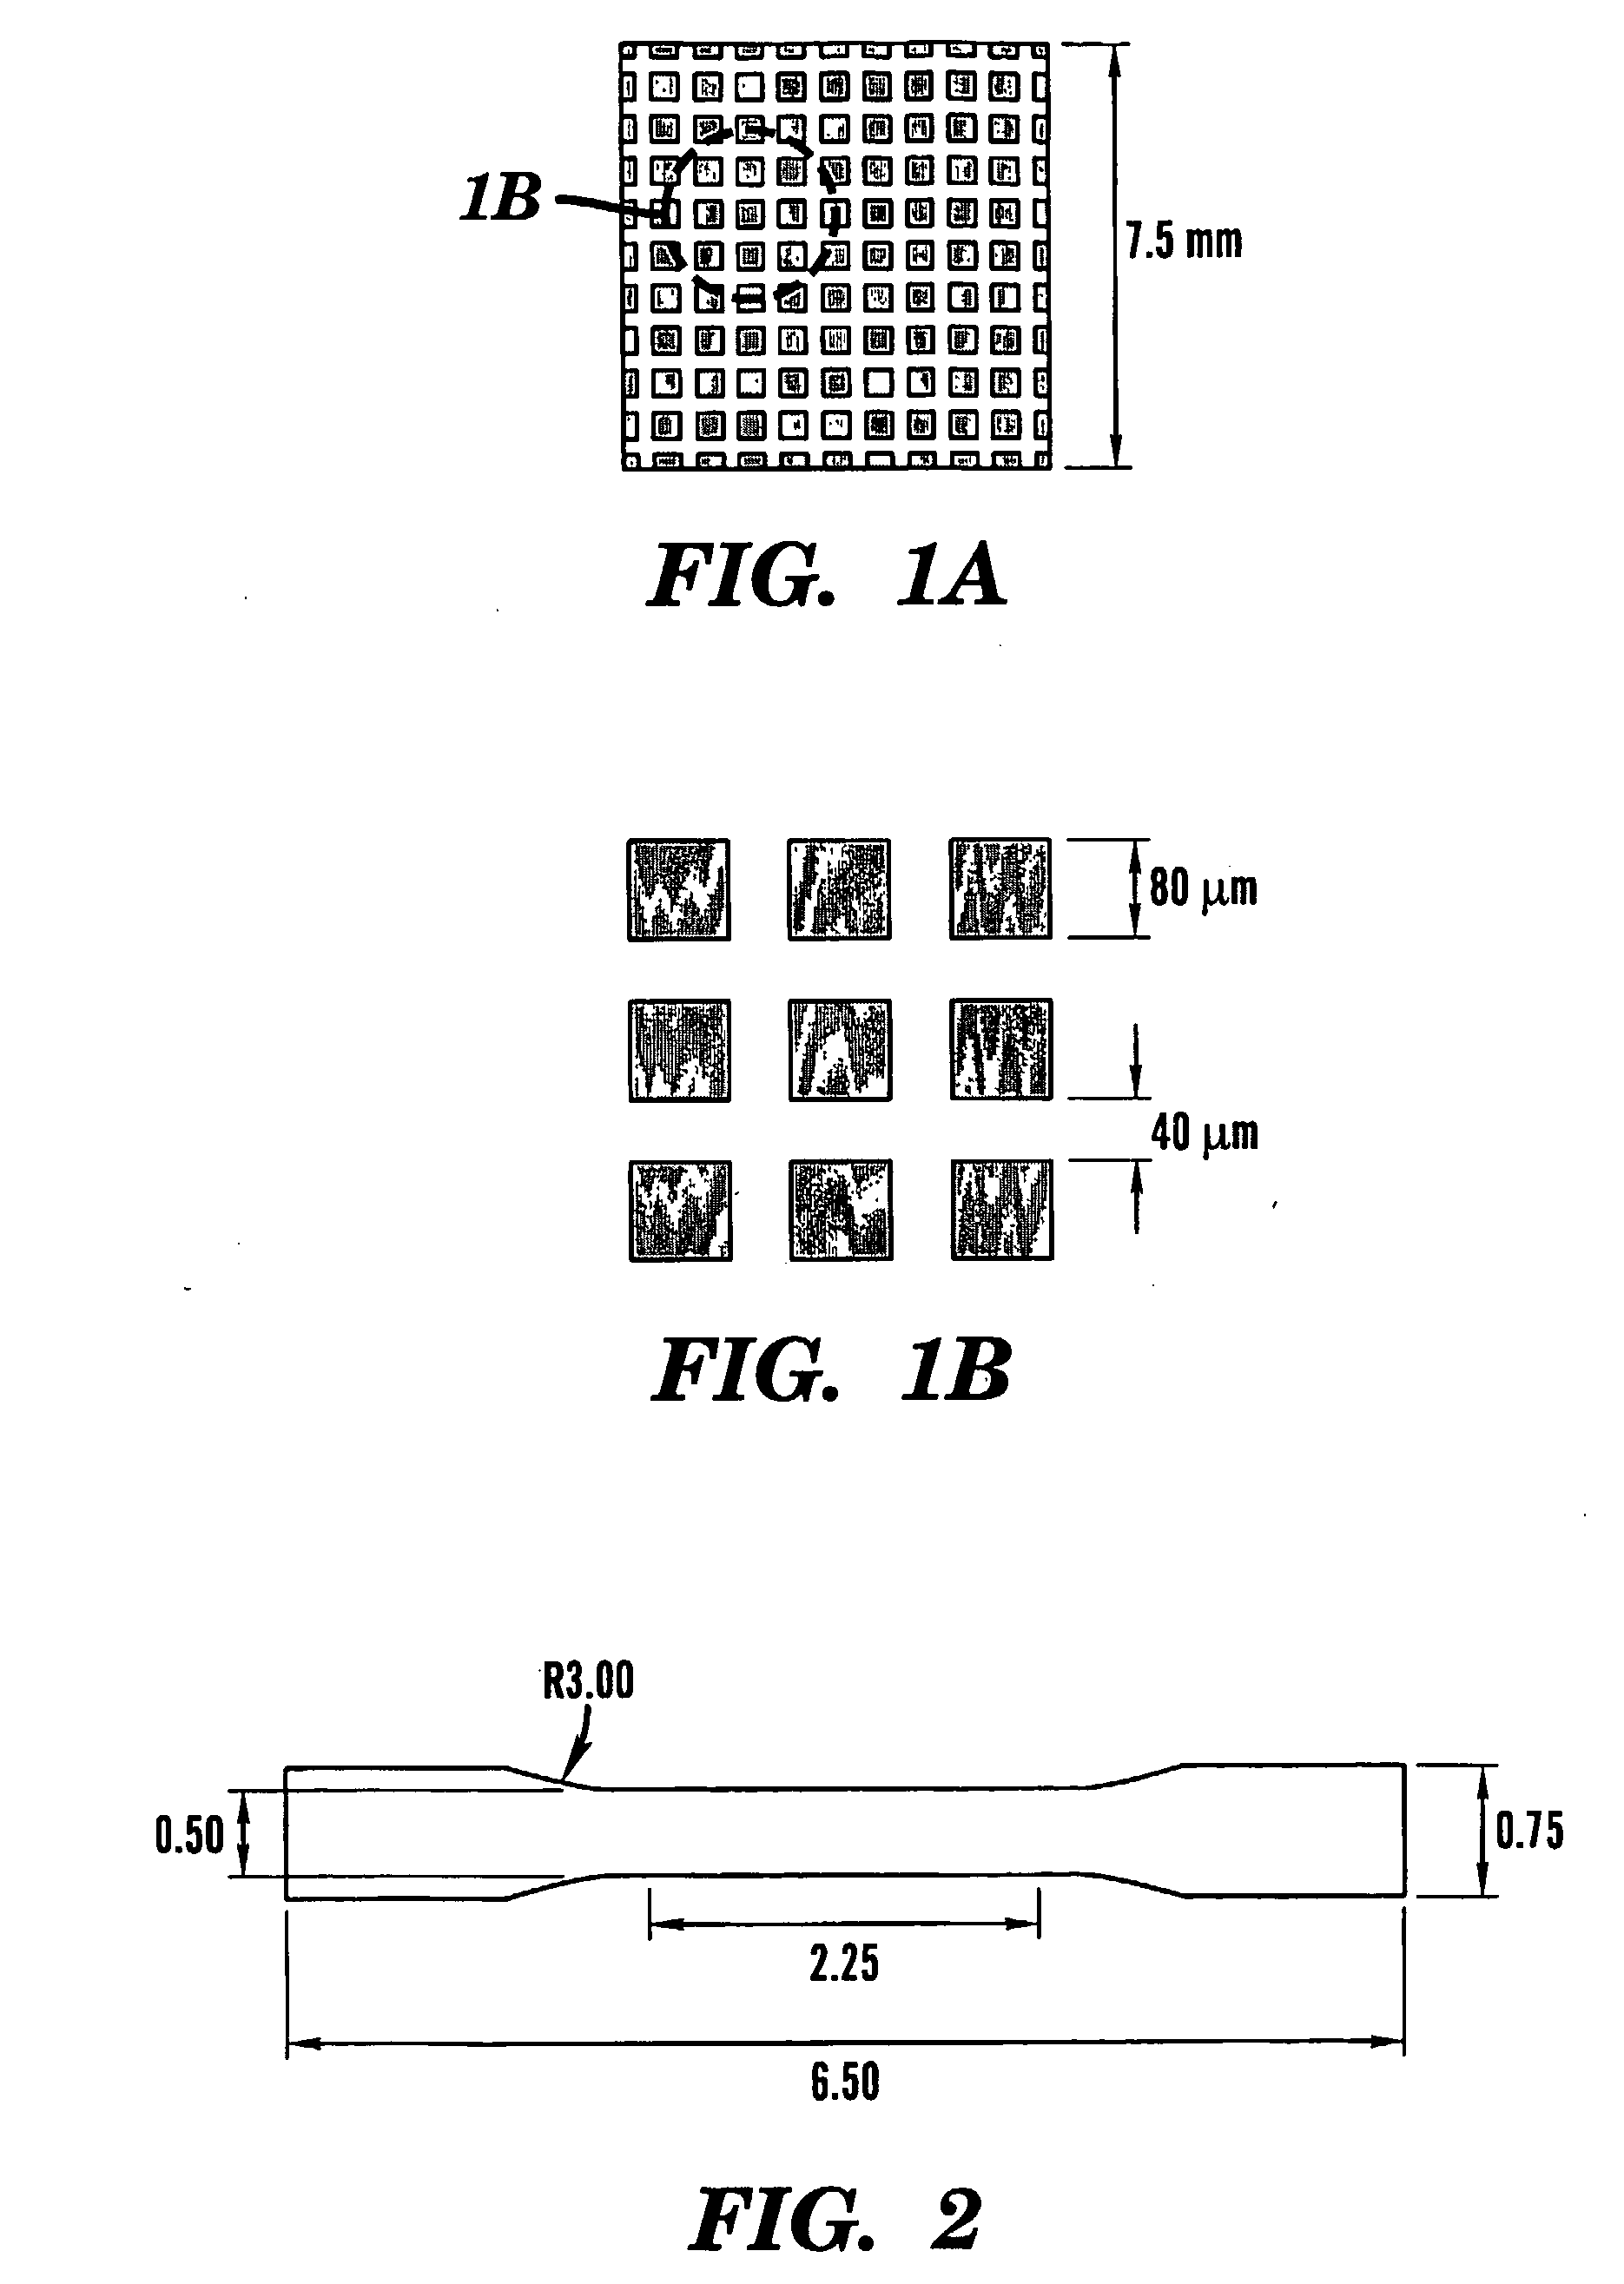 Method for Producing Biomaterial Scaffolds